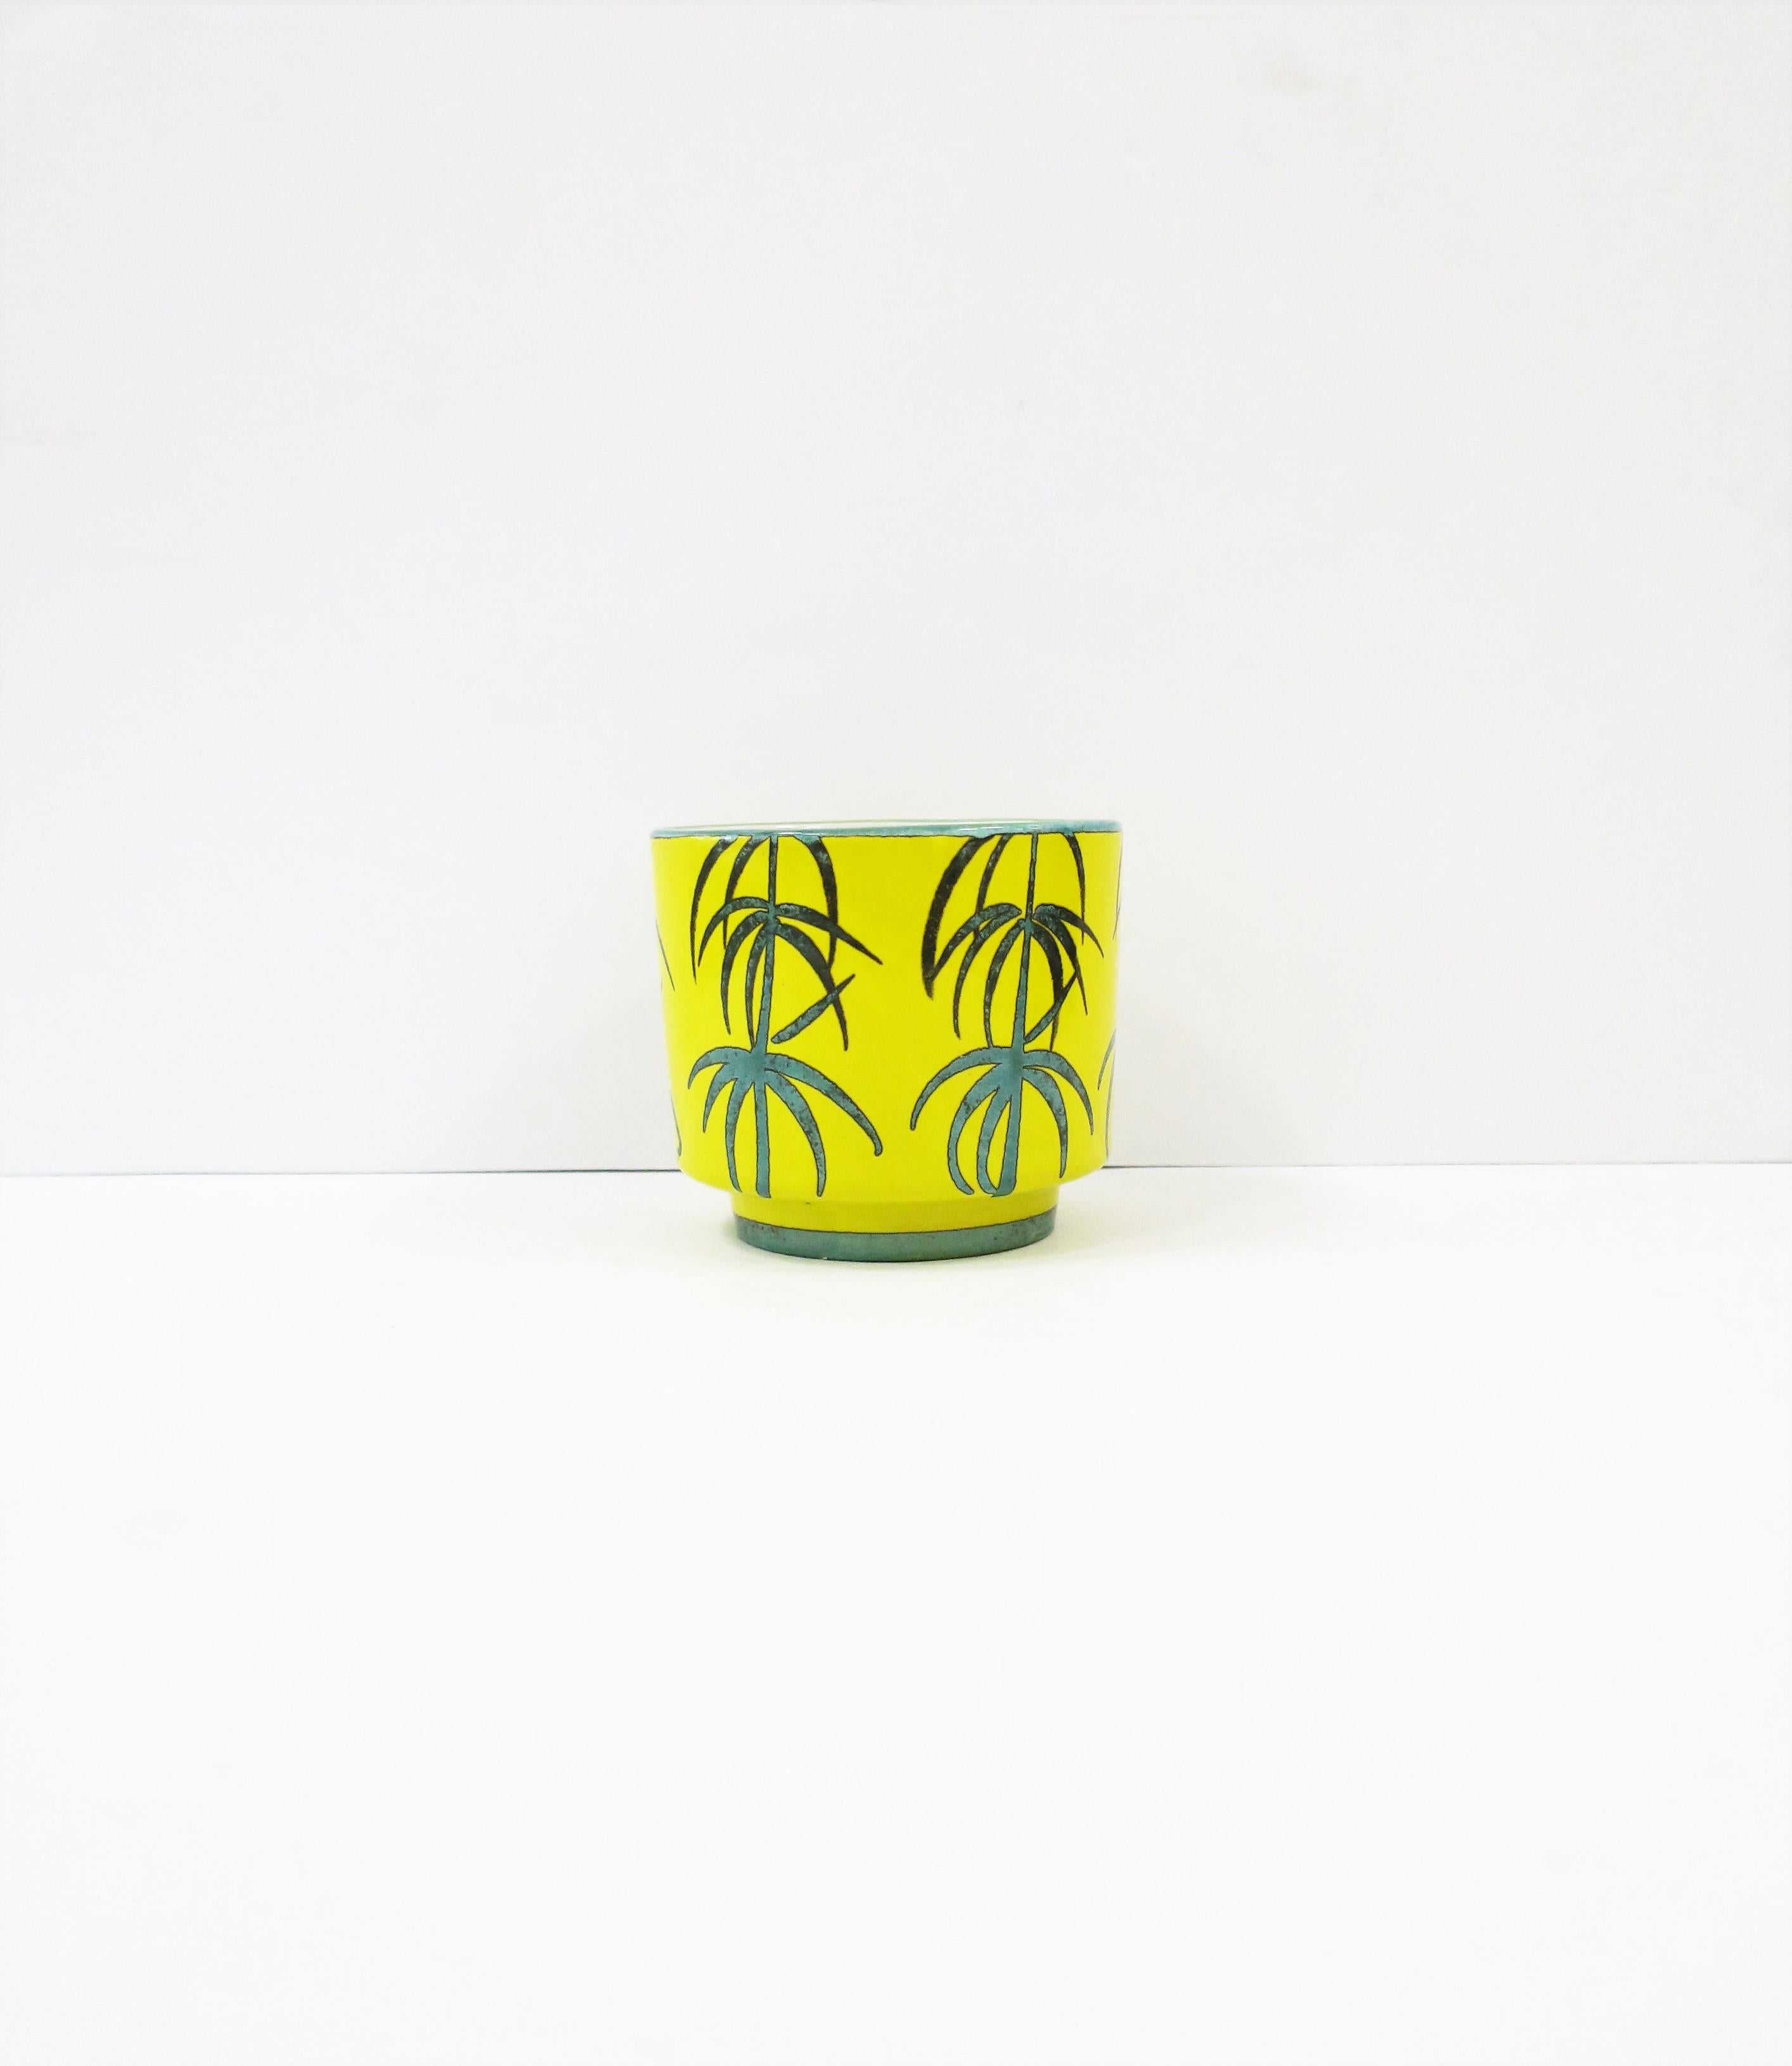 A beautiful bright yellow Italian ceramic jardinière cachepot planter or flower pot holder with modern palm tree design, circa late-20th century, Italy. Marked/imprinted 